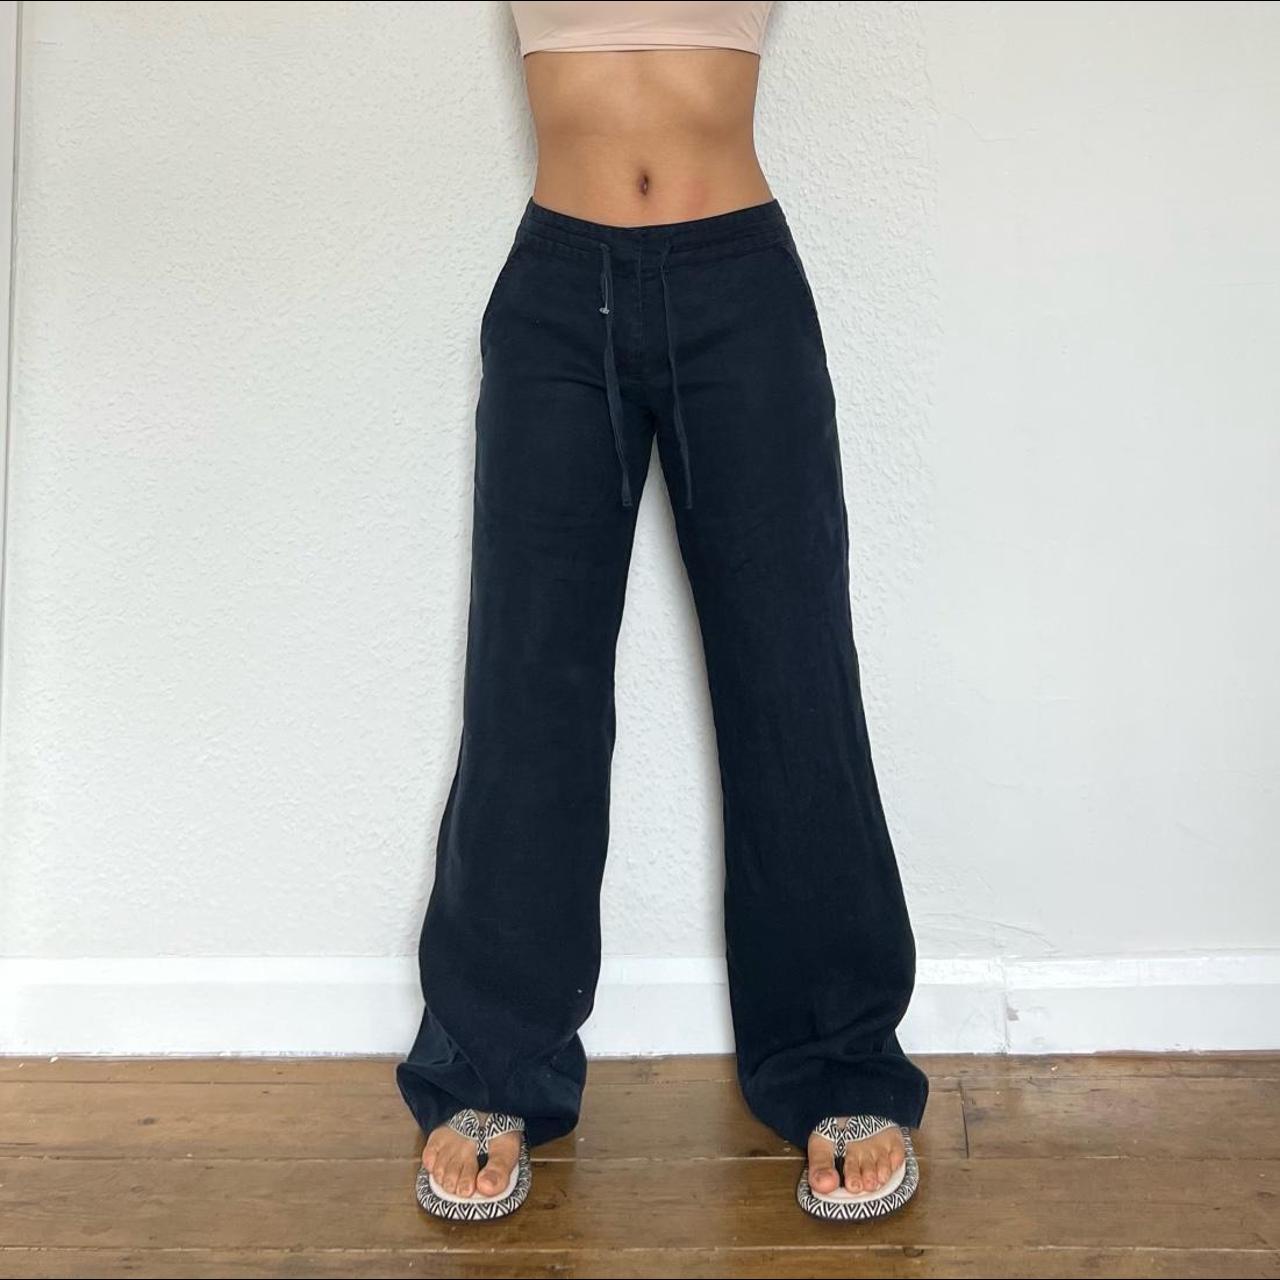 The White Company Women's Navy and Blue Trousers | Depop